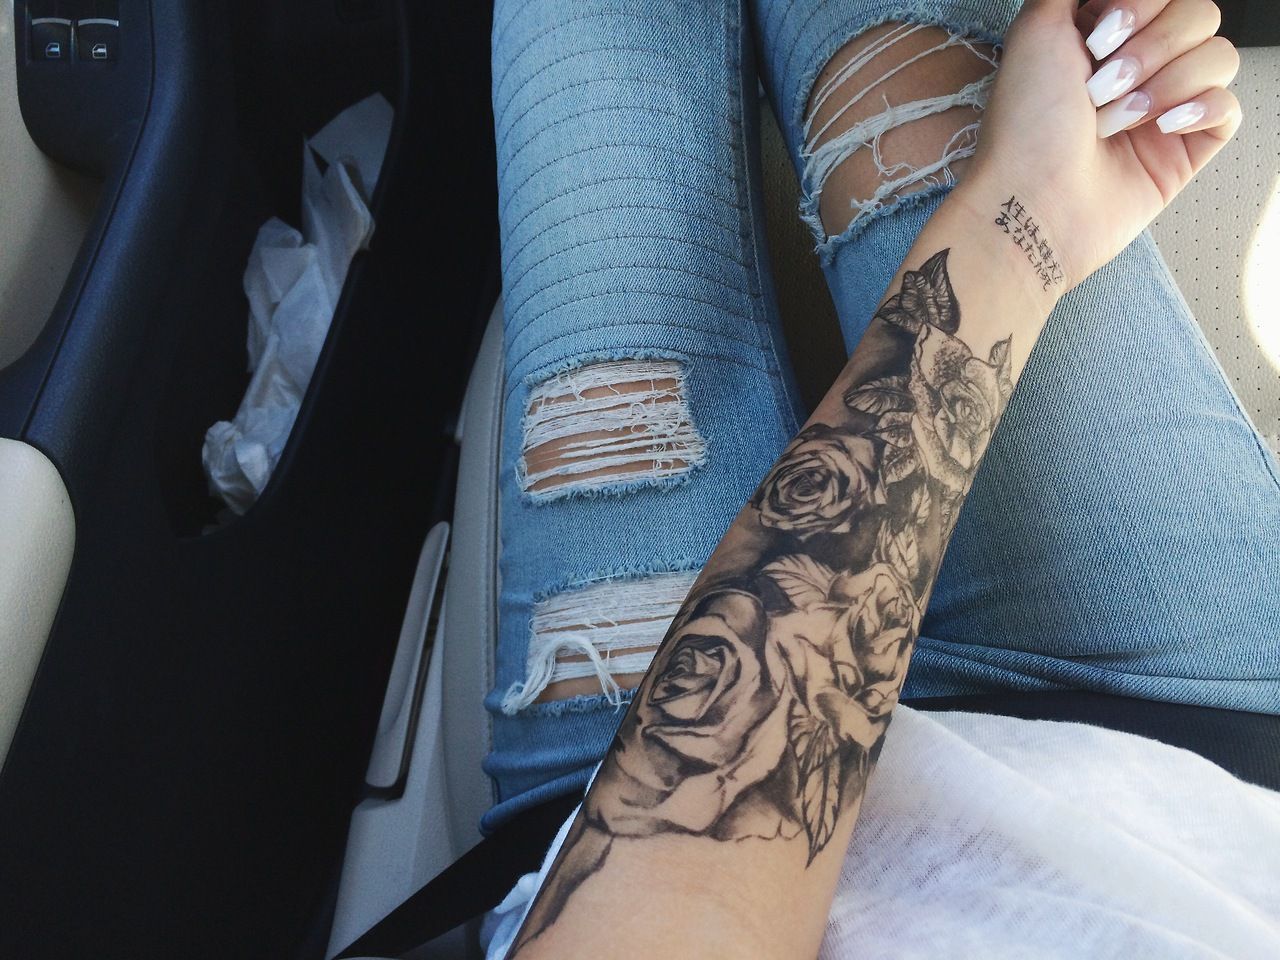 Serious about getting a sleeve… @Katherine Morin